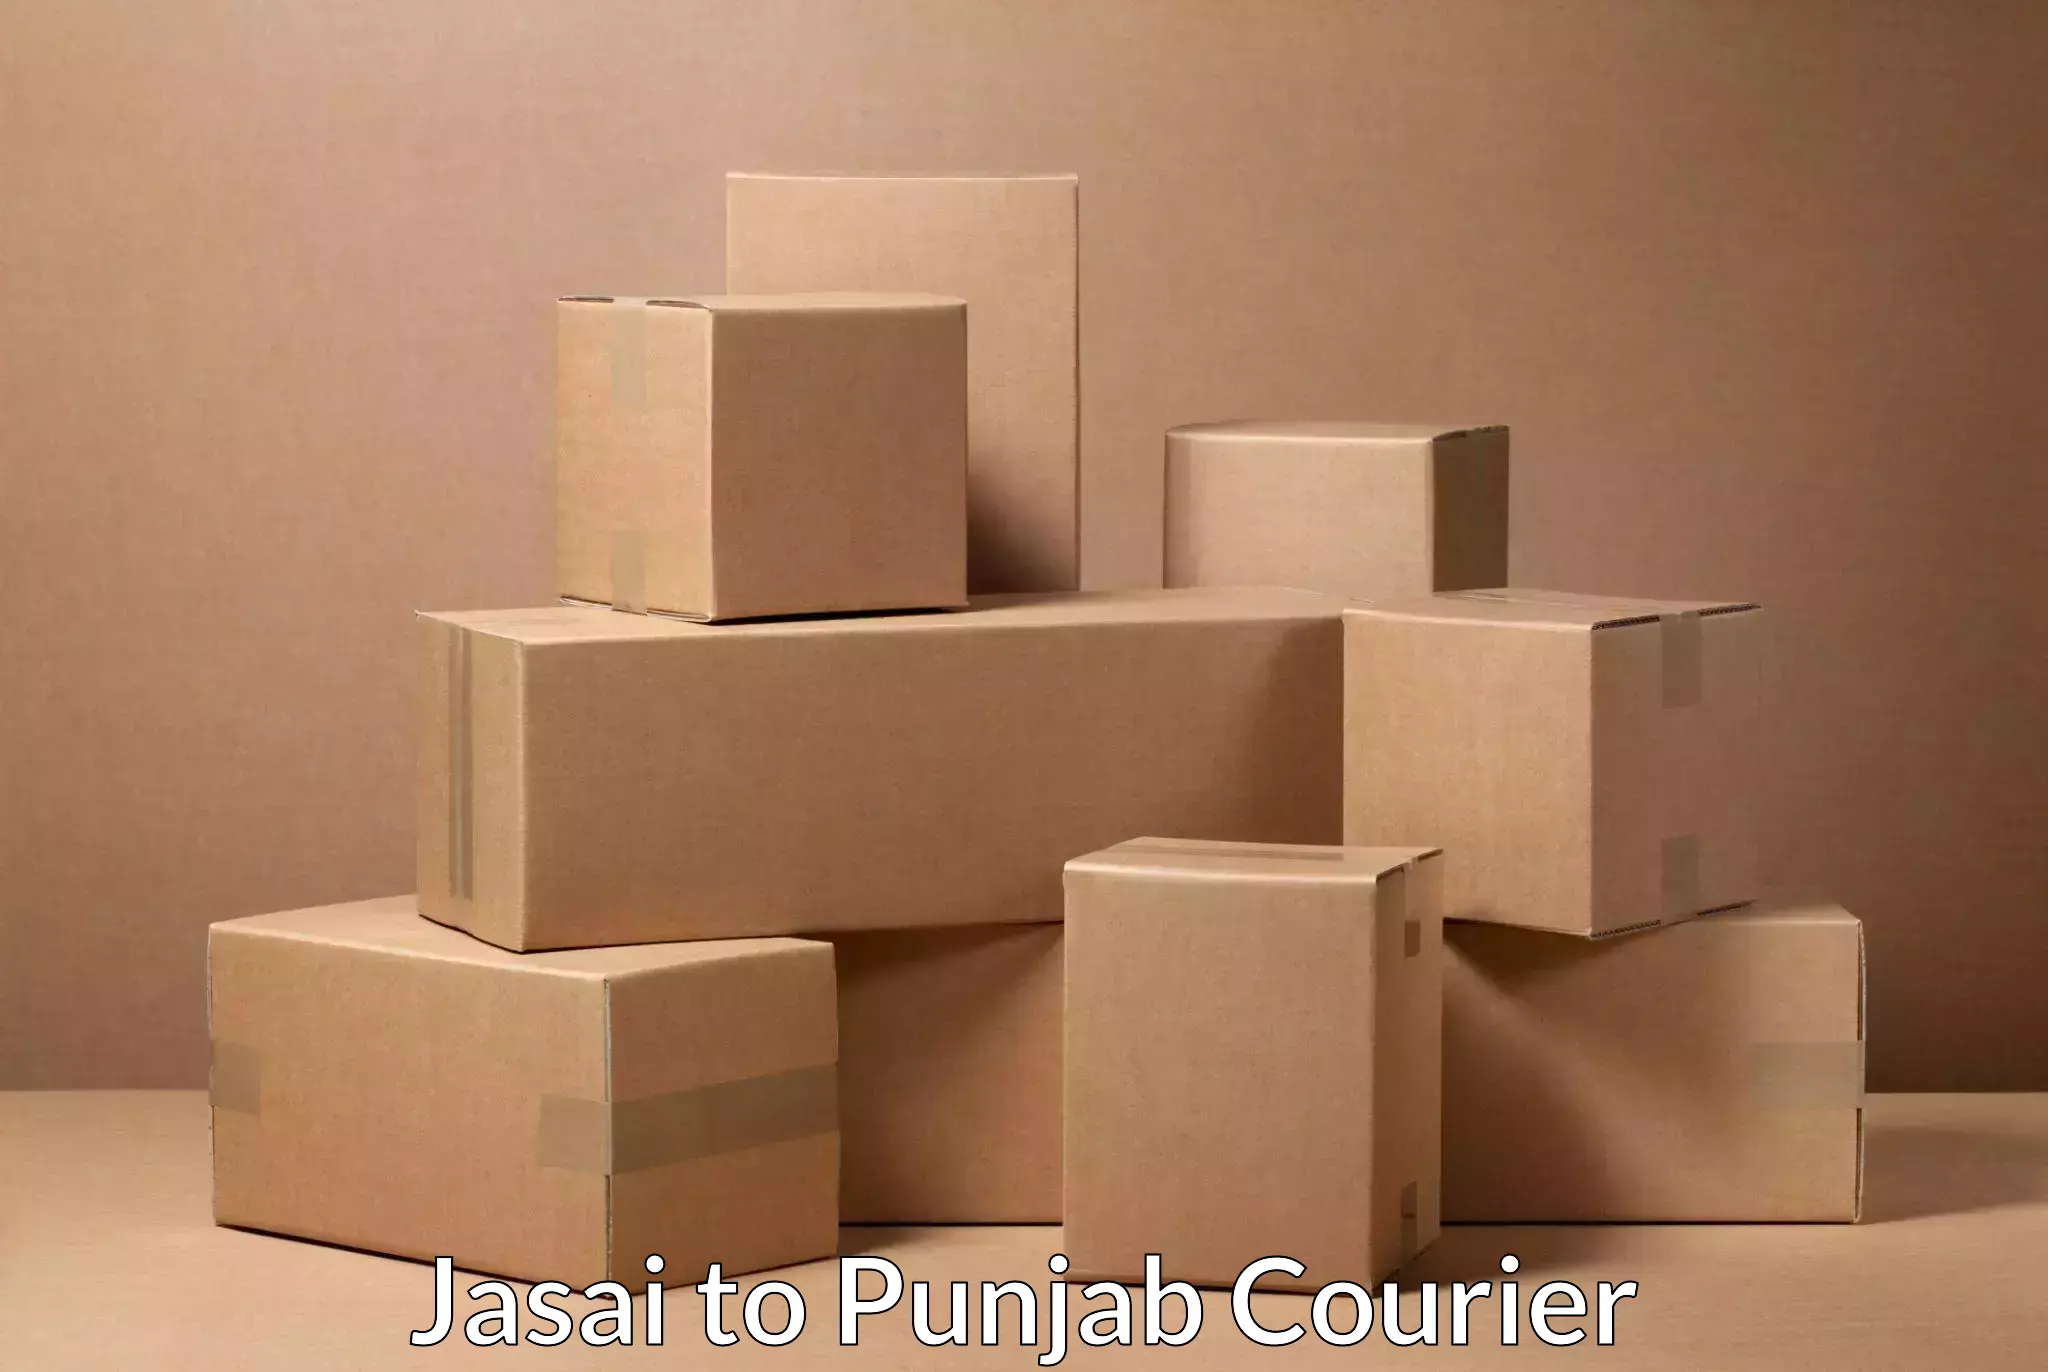 State-of-the-art courier technology Jasai to Zira